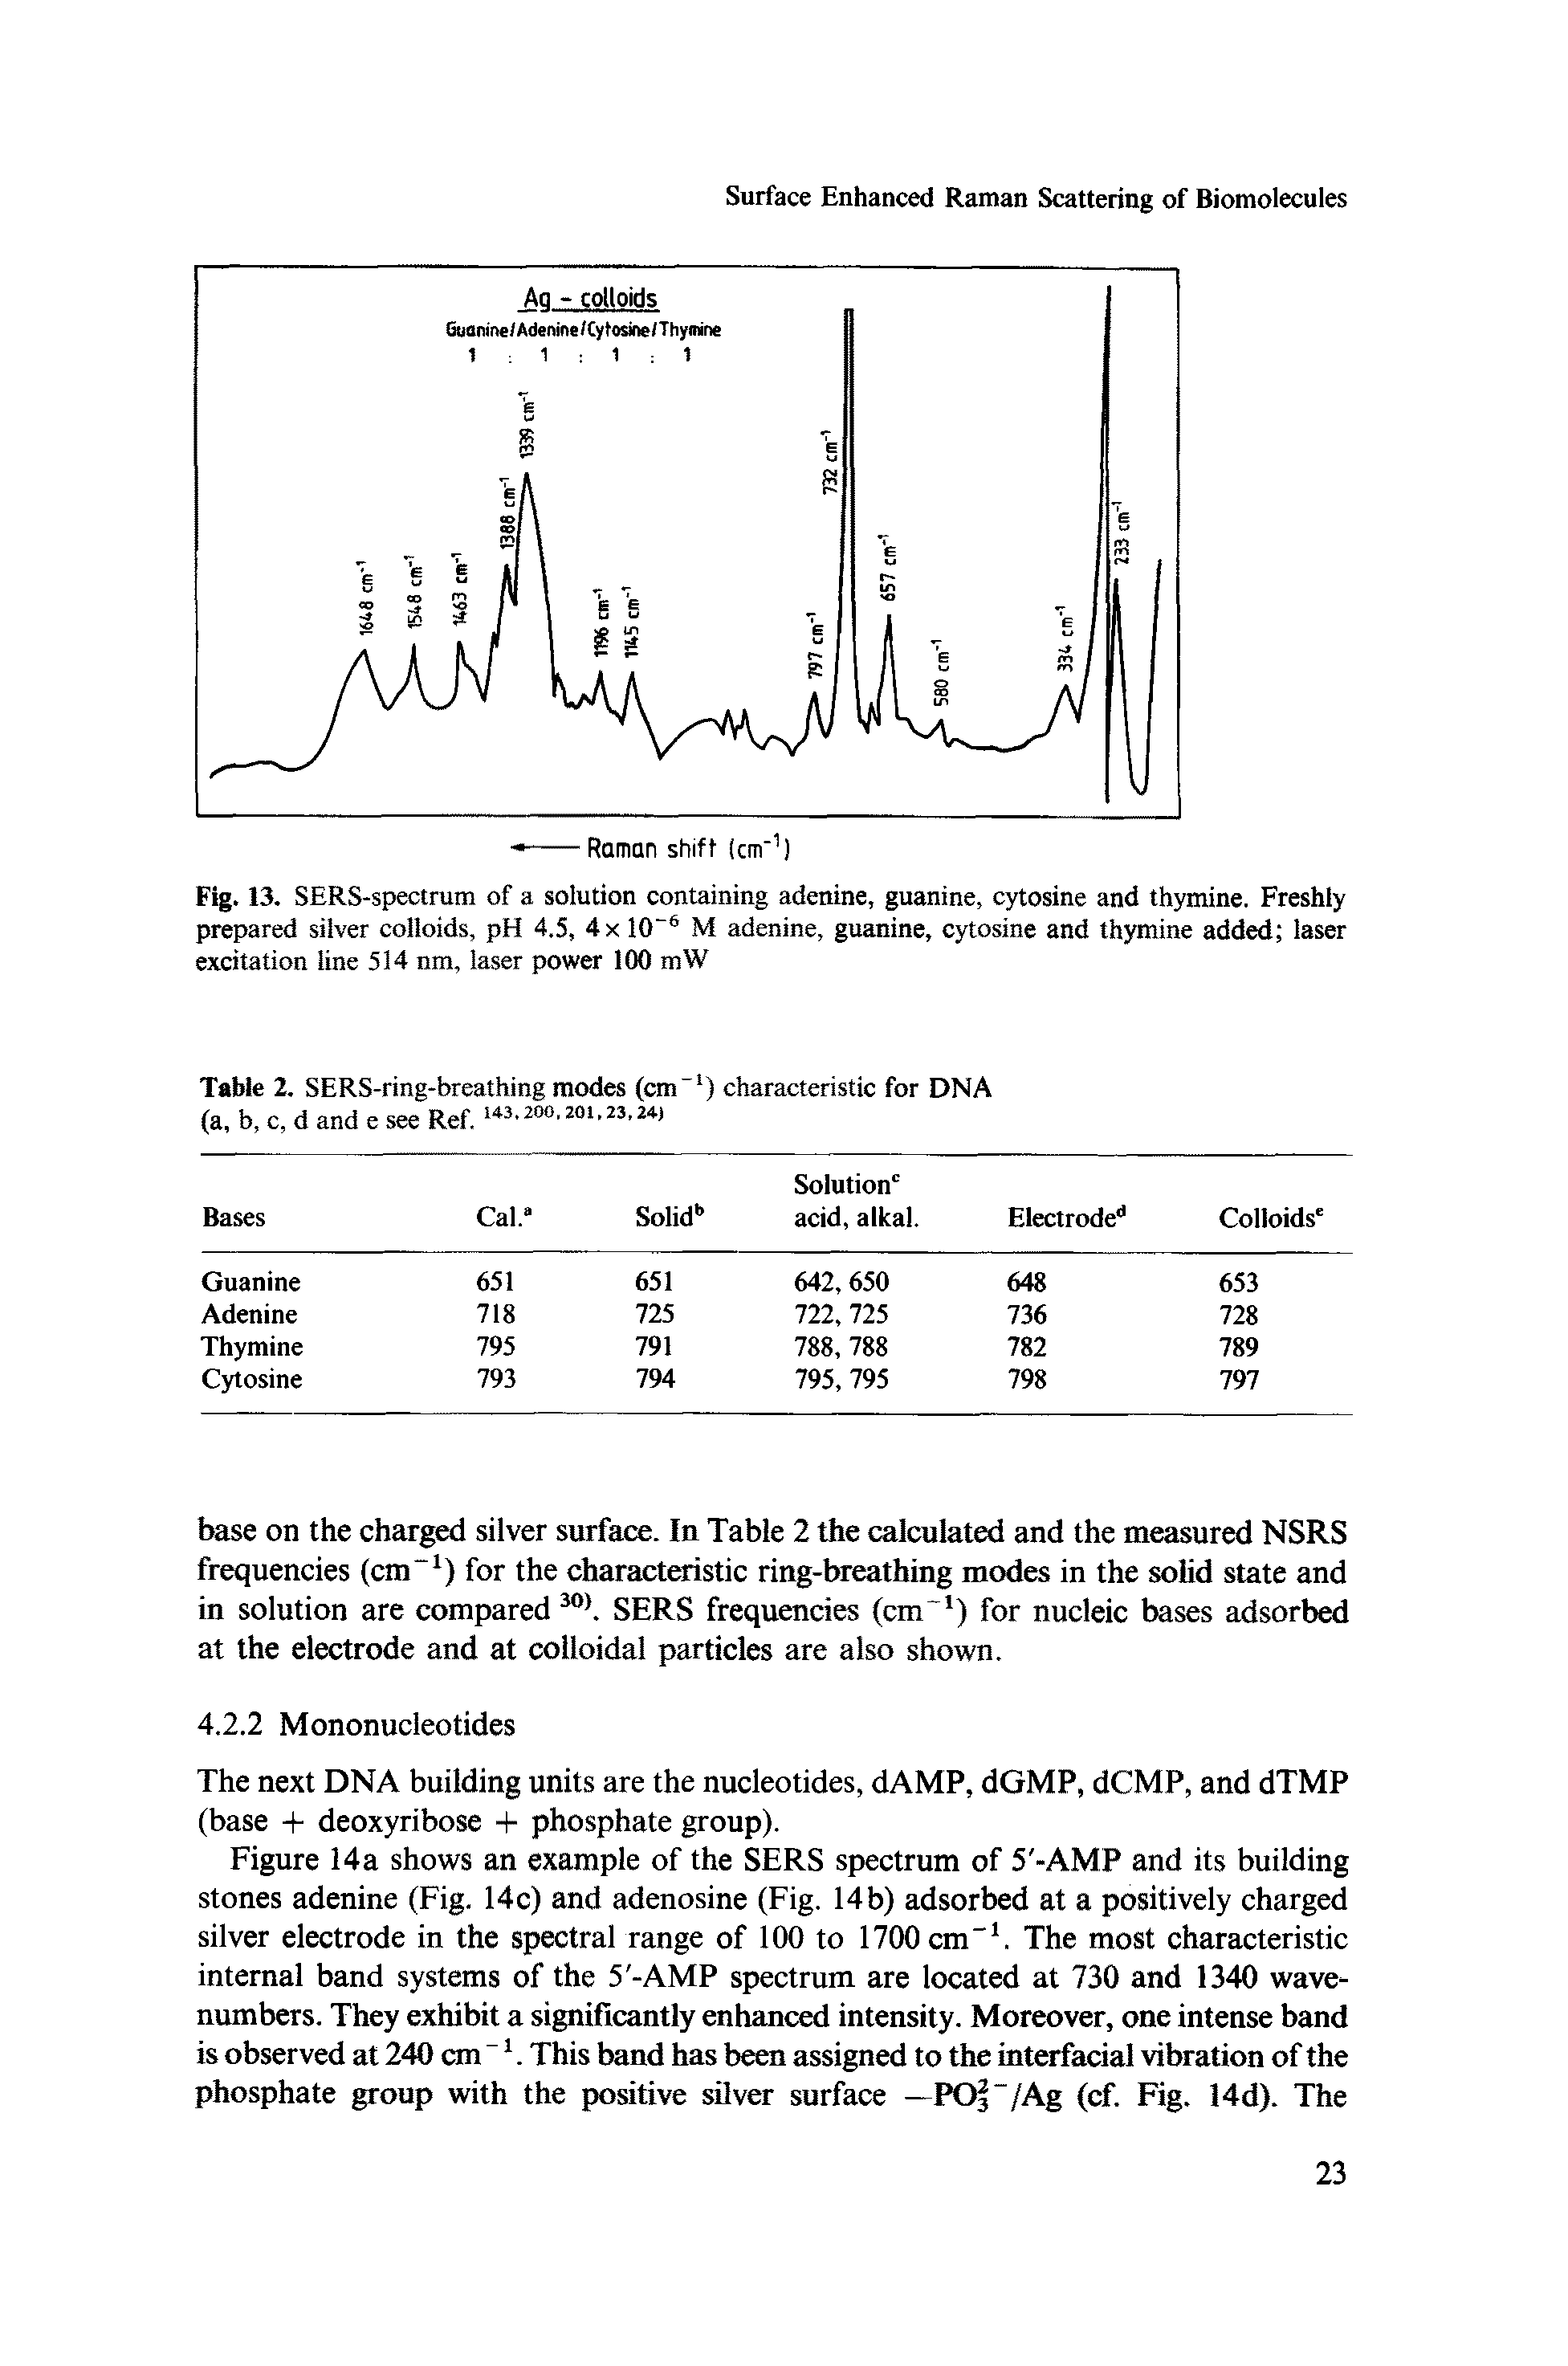 Fig. 13. SERS-spectrum of a solution containing adenine, guanine, cytosine and thymine. Freshly prepared silver colloids, pH 4.5, 4x 10 M adenine, guanine, cytosine and thymine added laser excitation line 514 nm, laser power 100 mW...